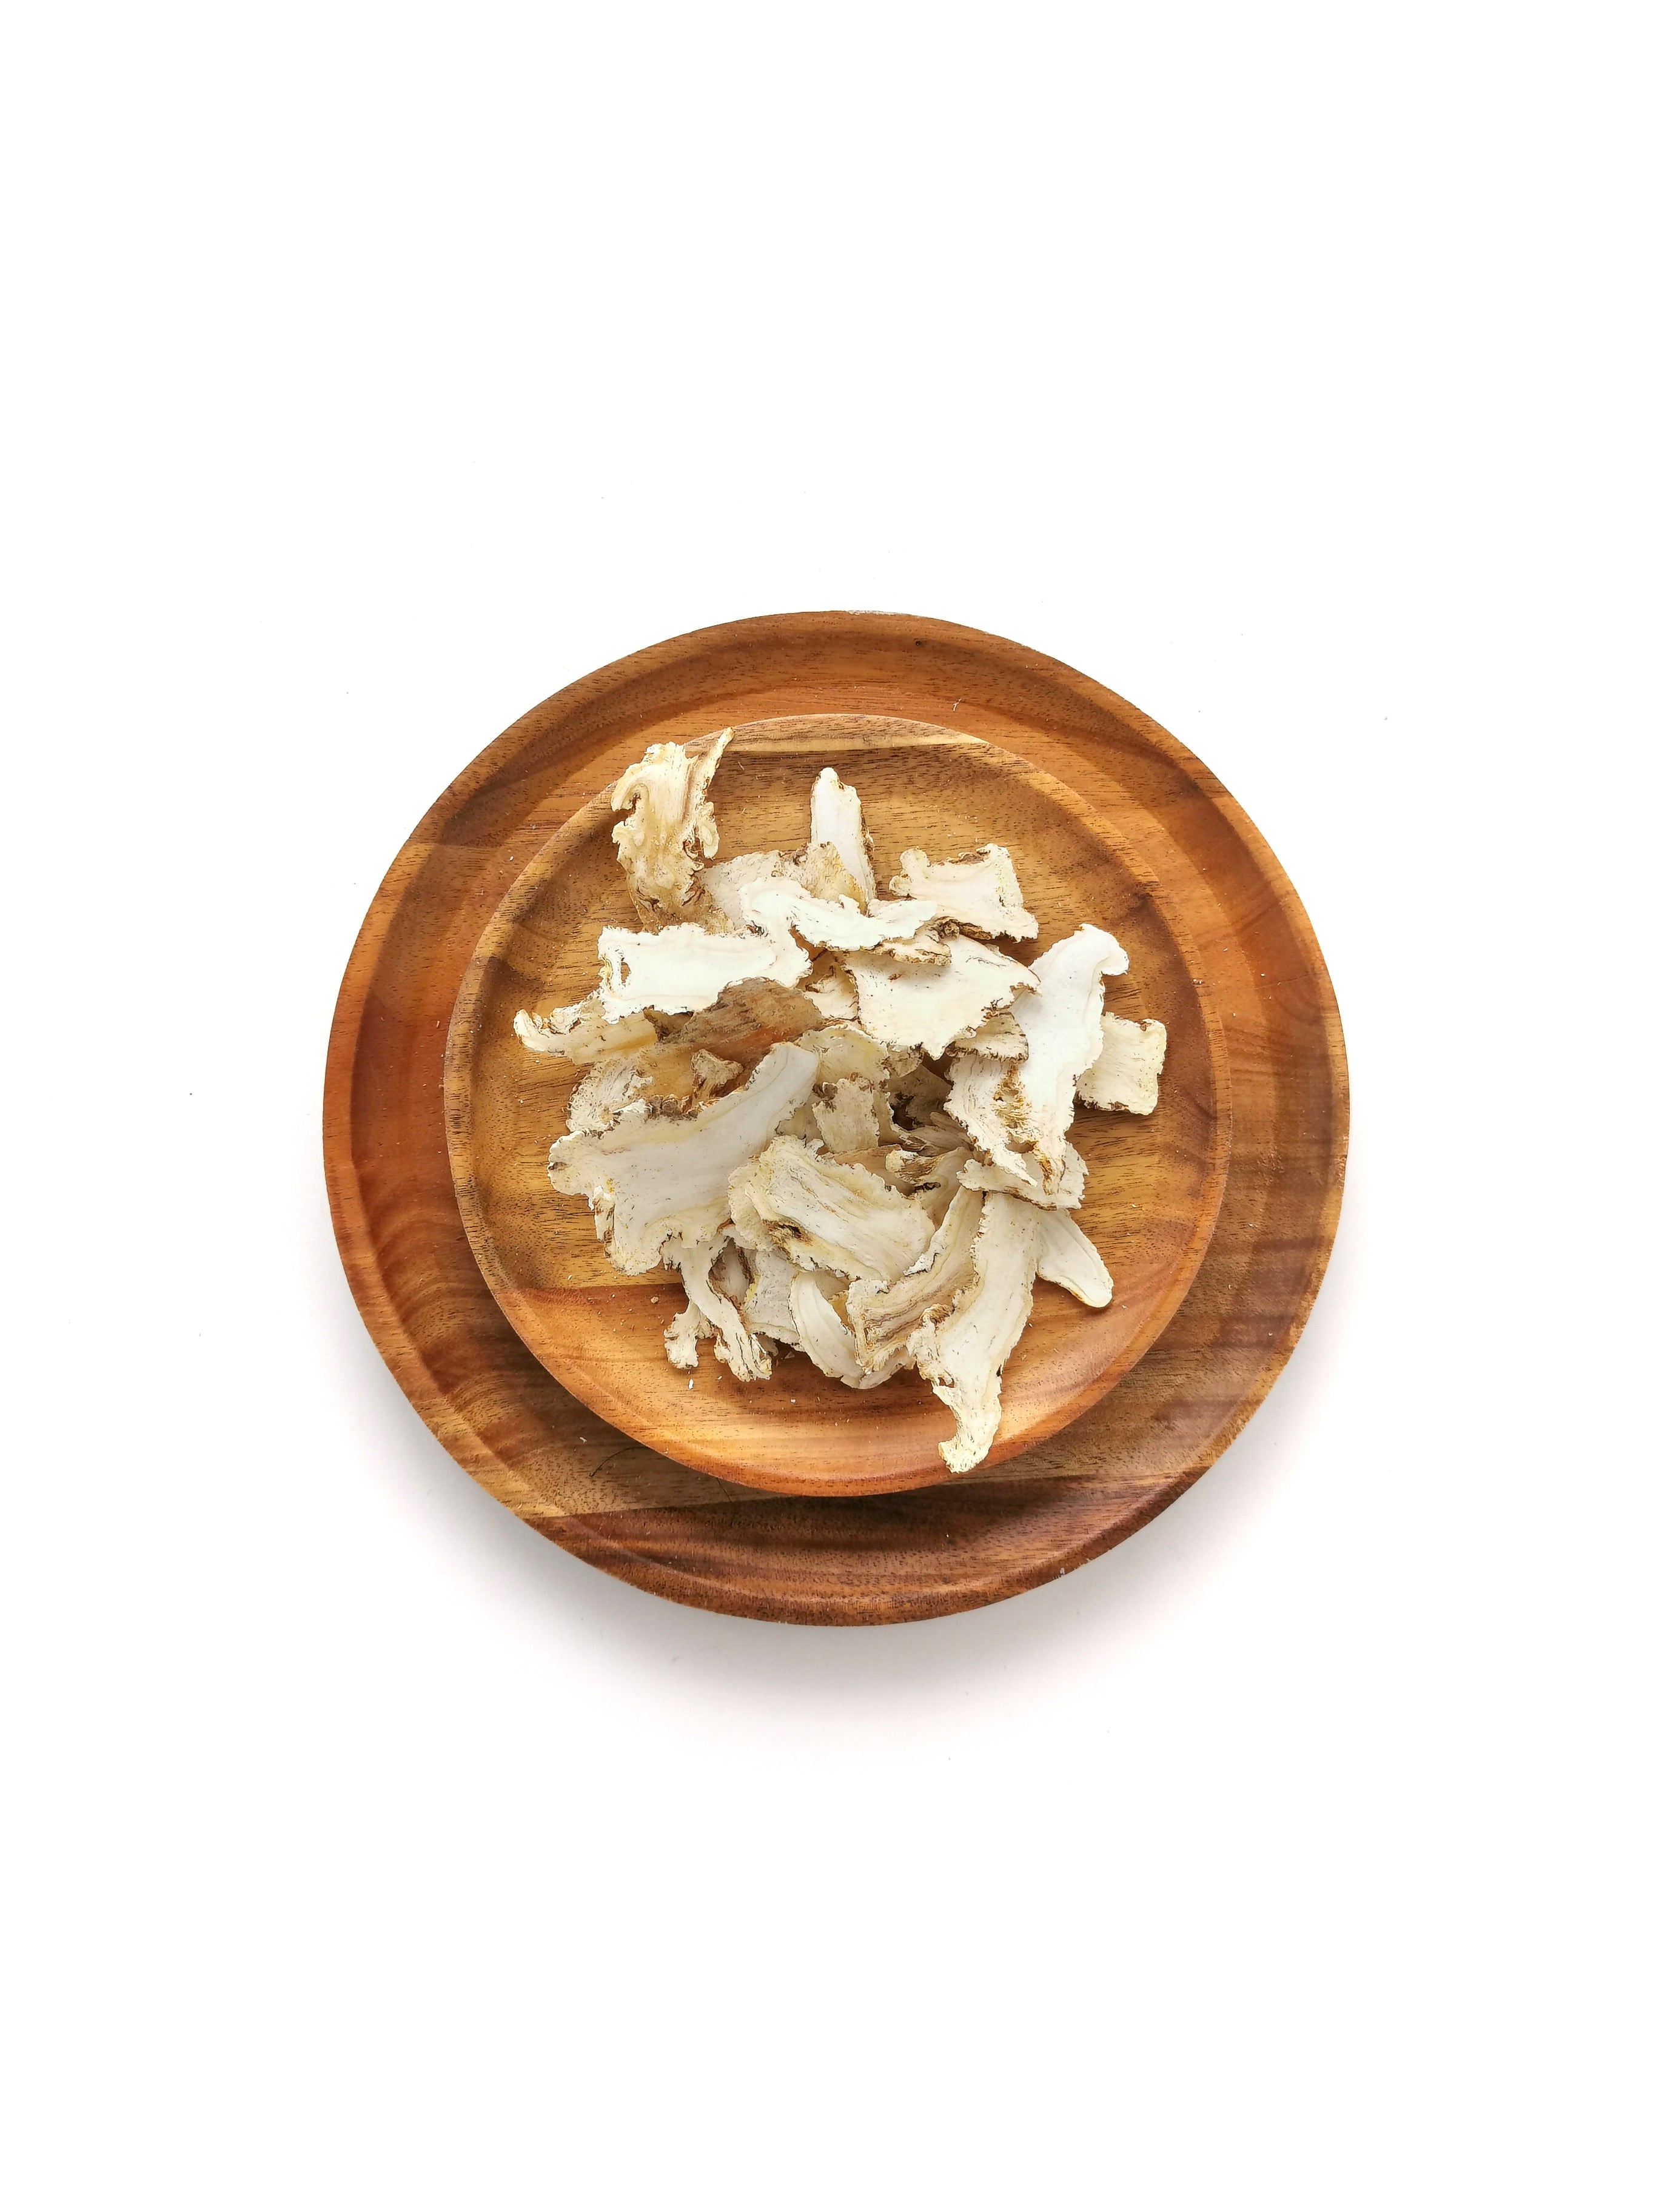 Sliced Angelica Sinensis 當歸片